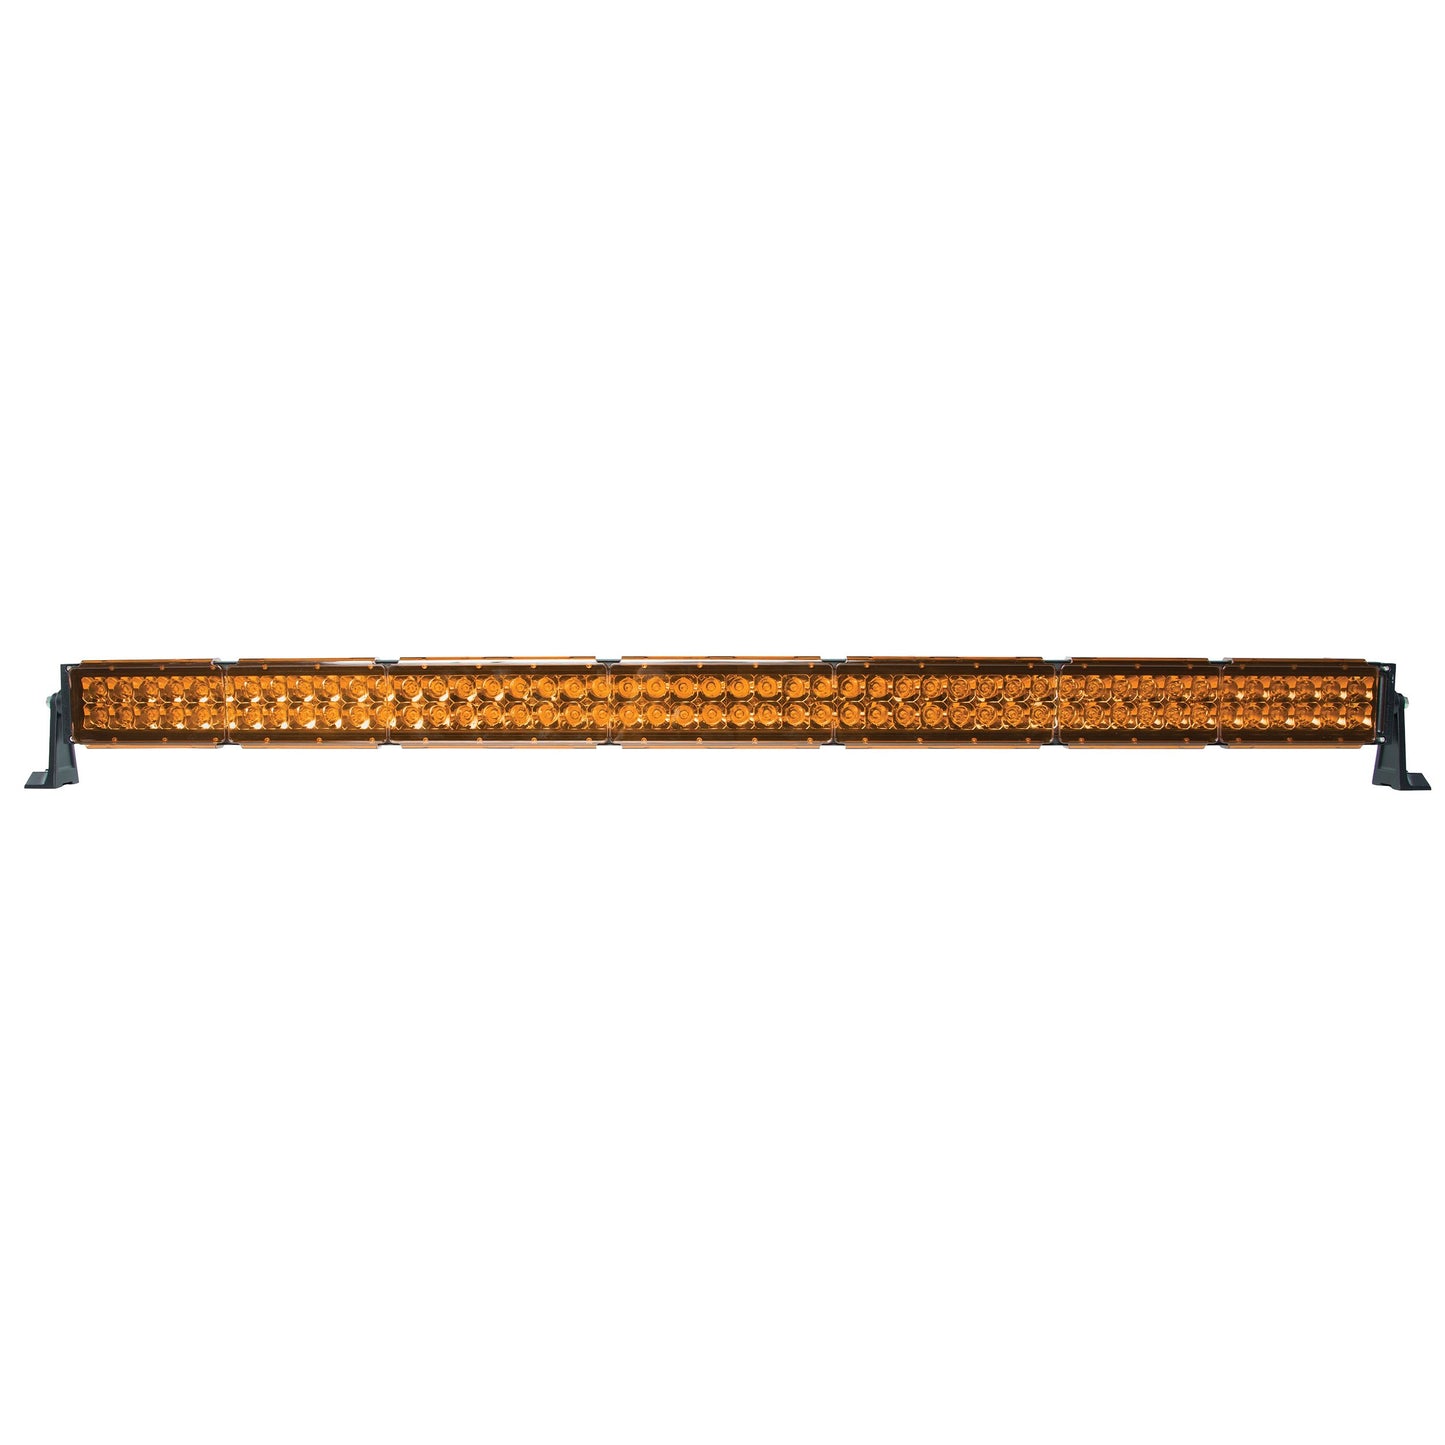 Light Covers for DRC, DRCX and Infinity Light Bars - 54" 10-30124/10-30125